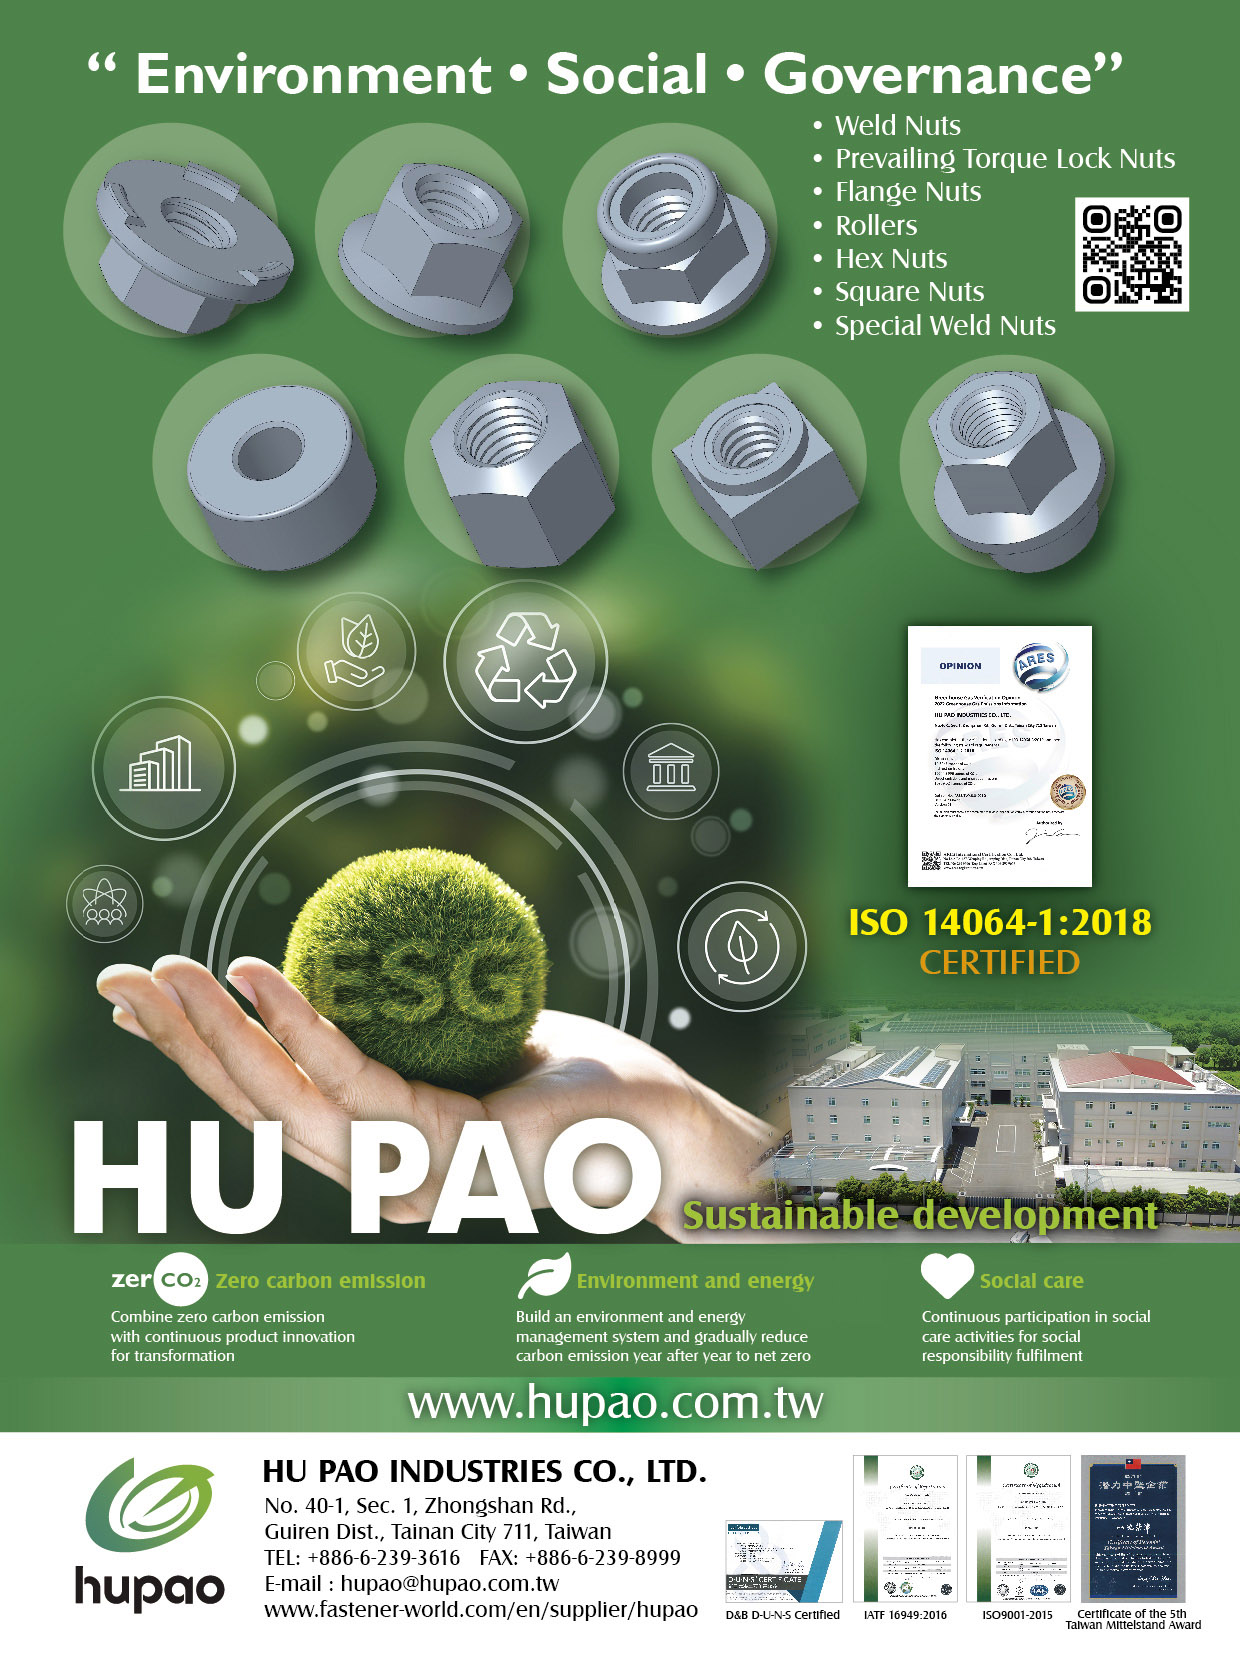 HU PAO INDUSTRIES CO., LTD.  , Weld Nuts, Prevailing Torque Lock Nuts, Flange Nuts, Rollers, Hex Nuts, Square Nuts, Special Weld Nuts